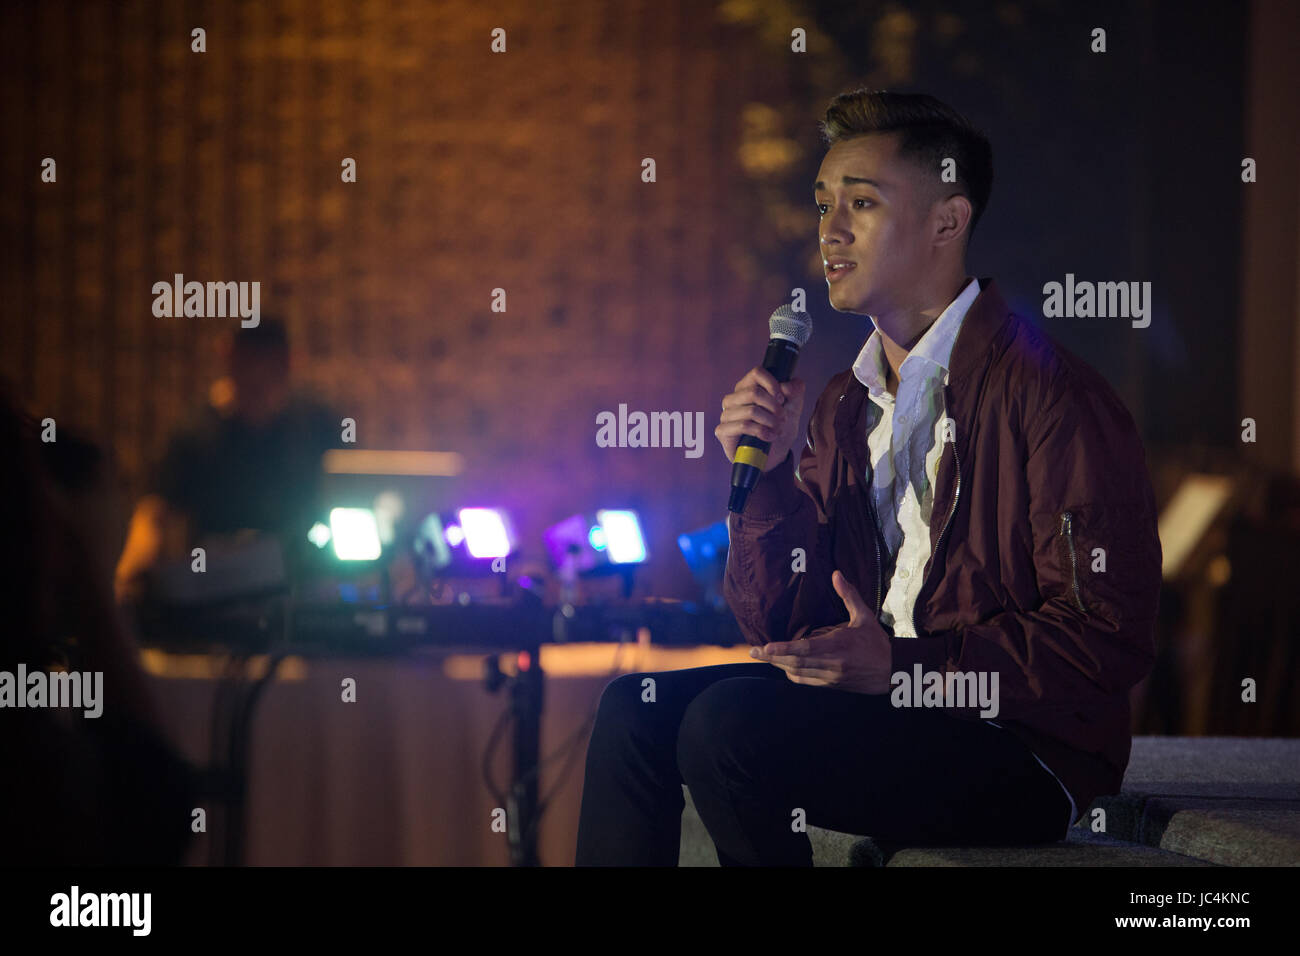 A young Asian man singing and performing indoor Stock Photo